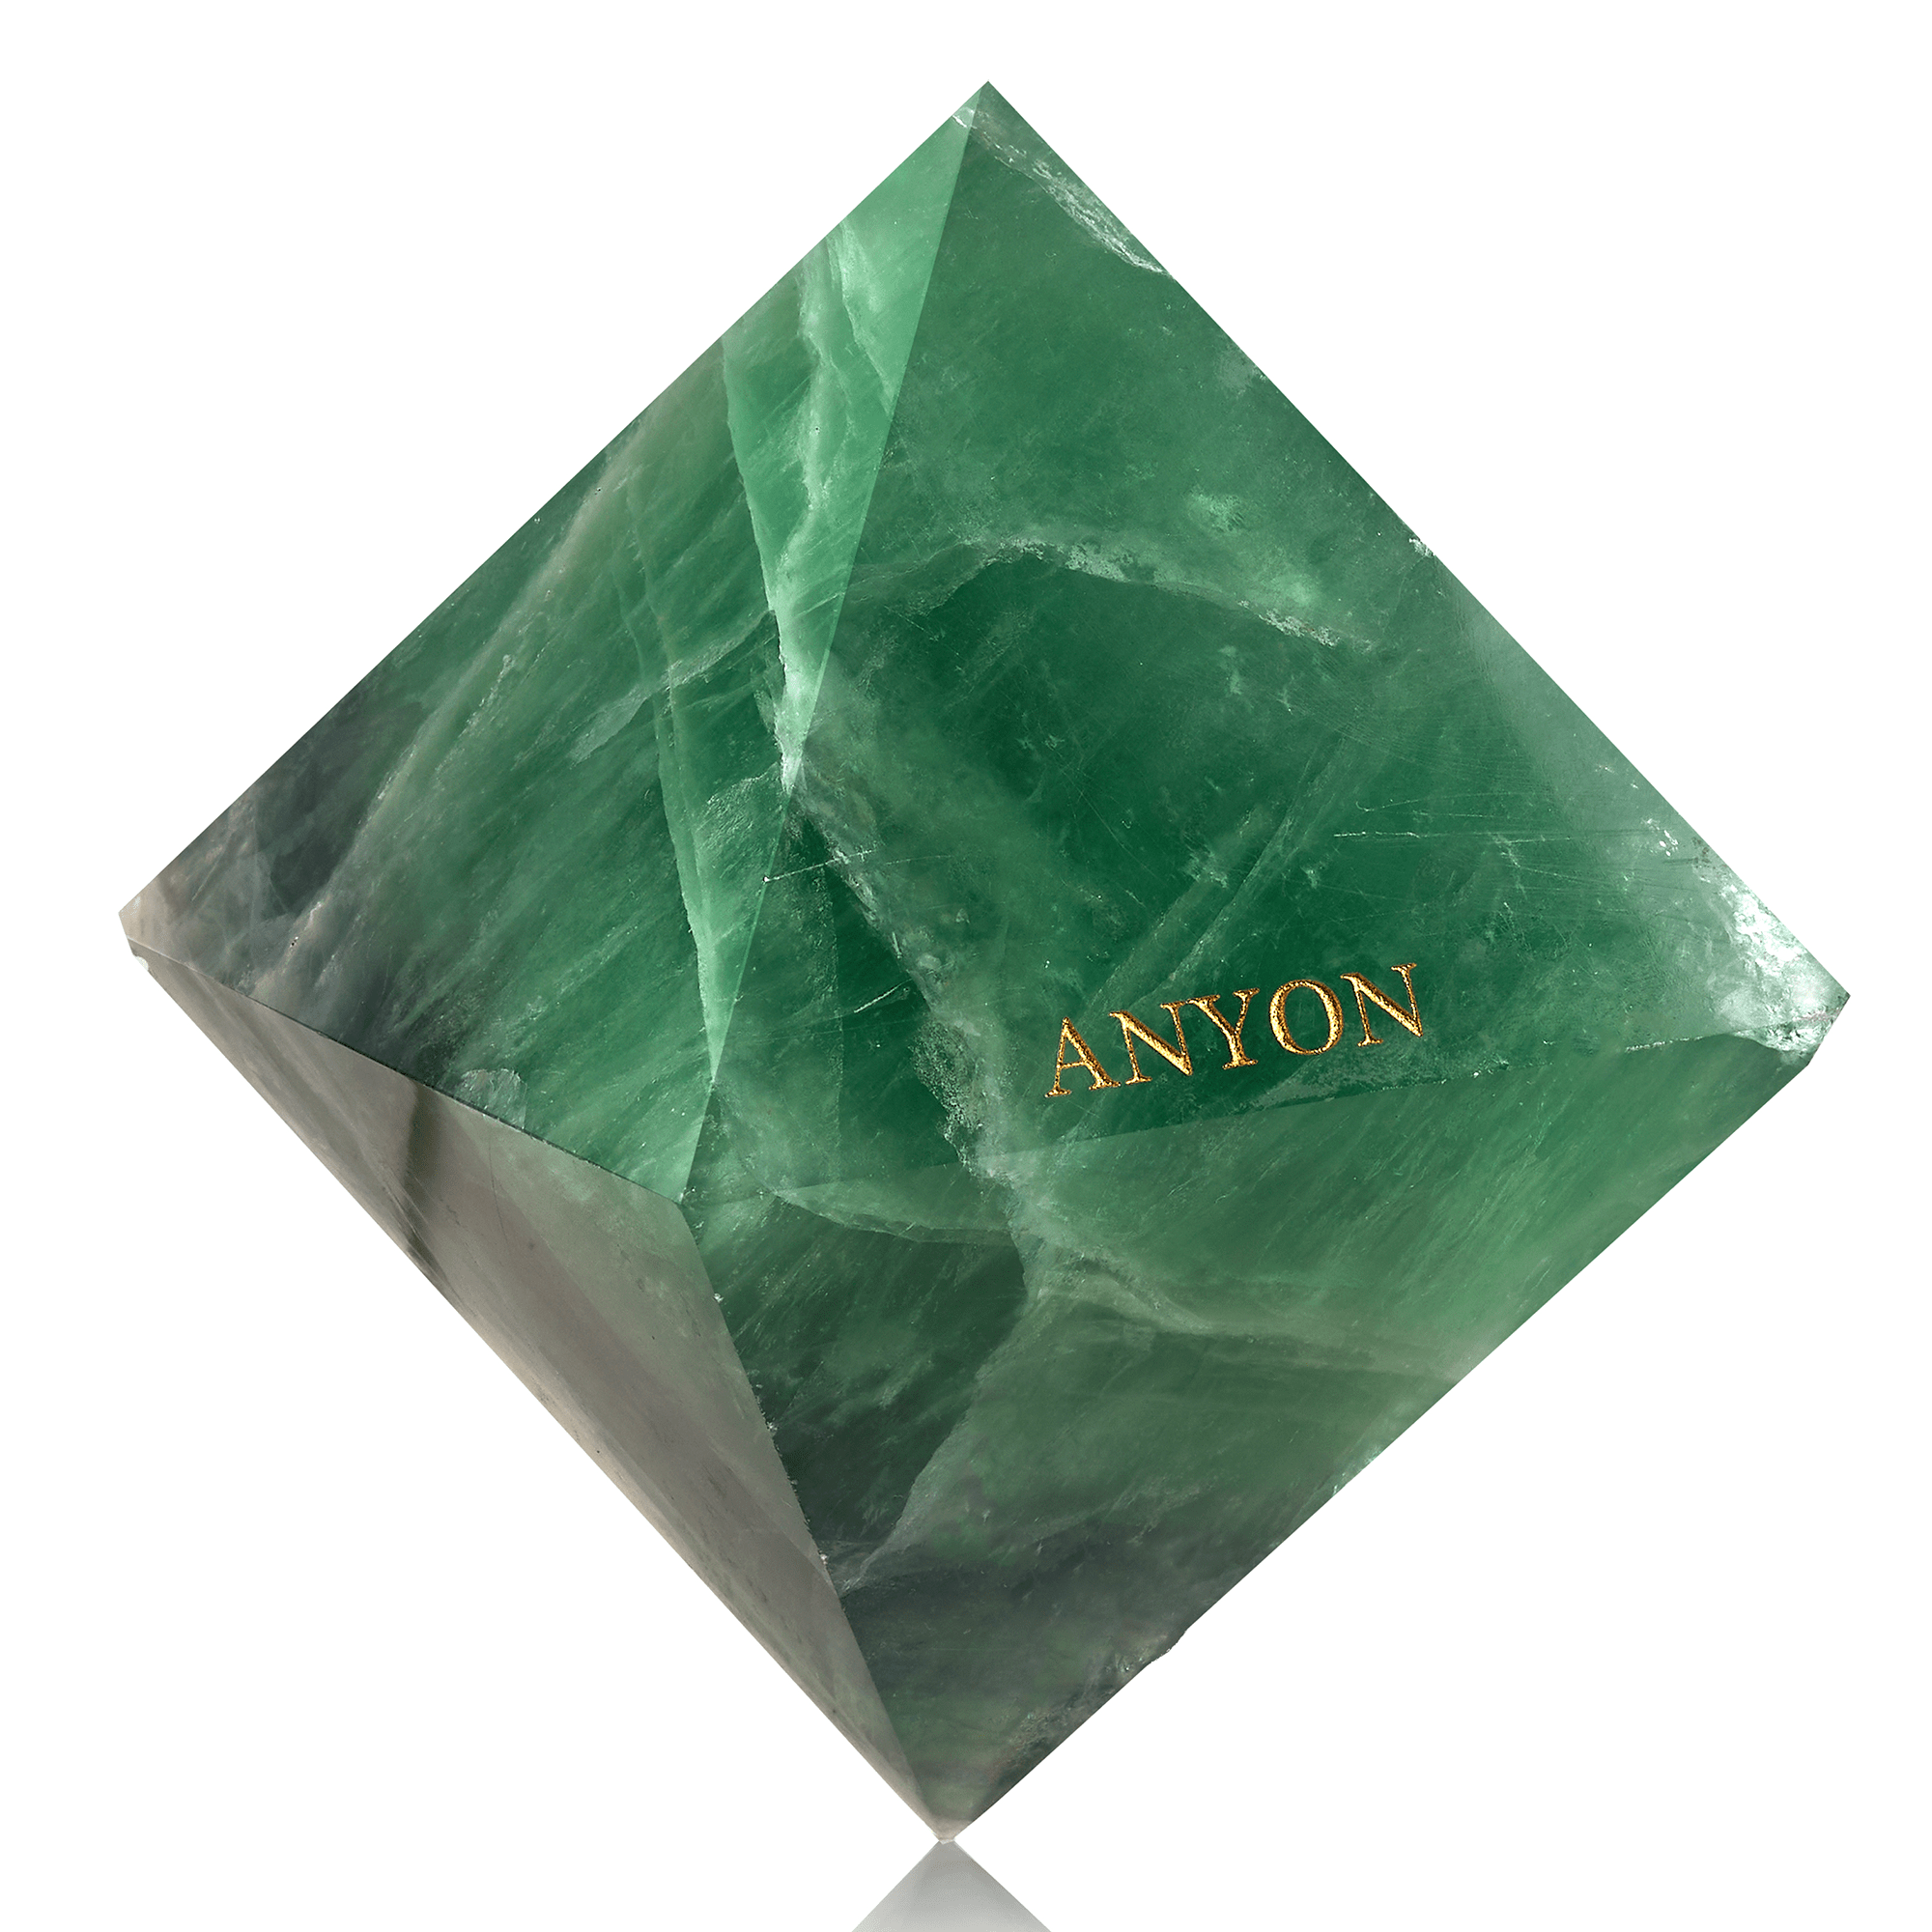 //anyon.info/wp-content/uploads/2022/09/Green-Octahedron.png